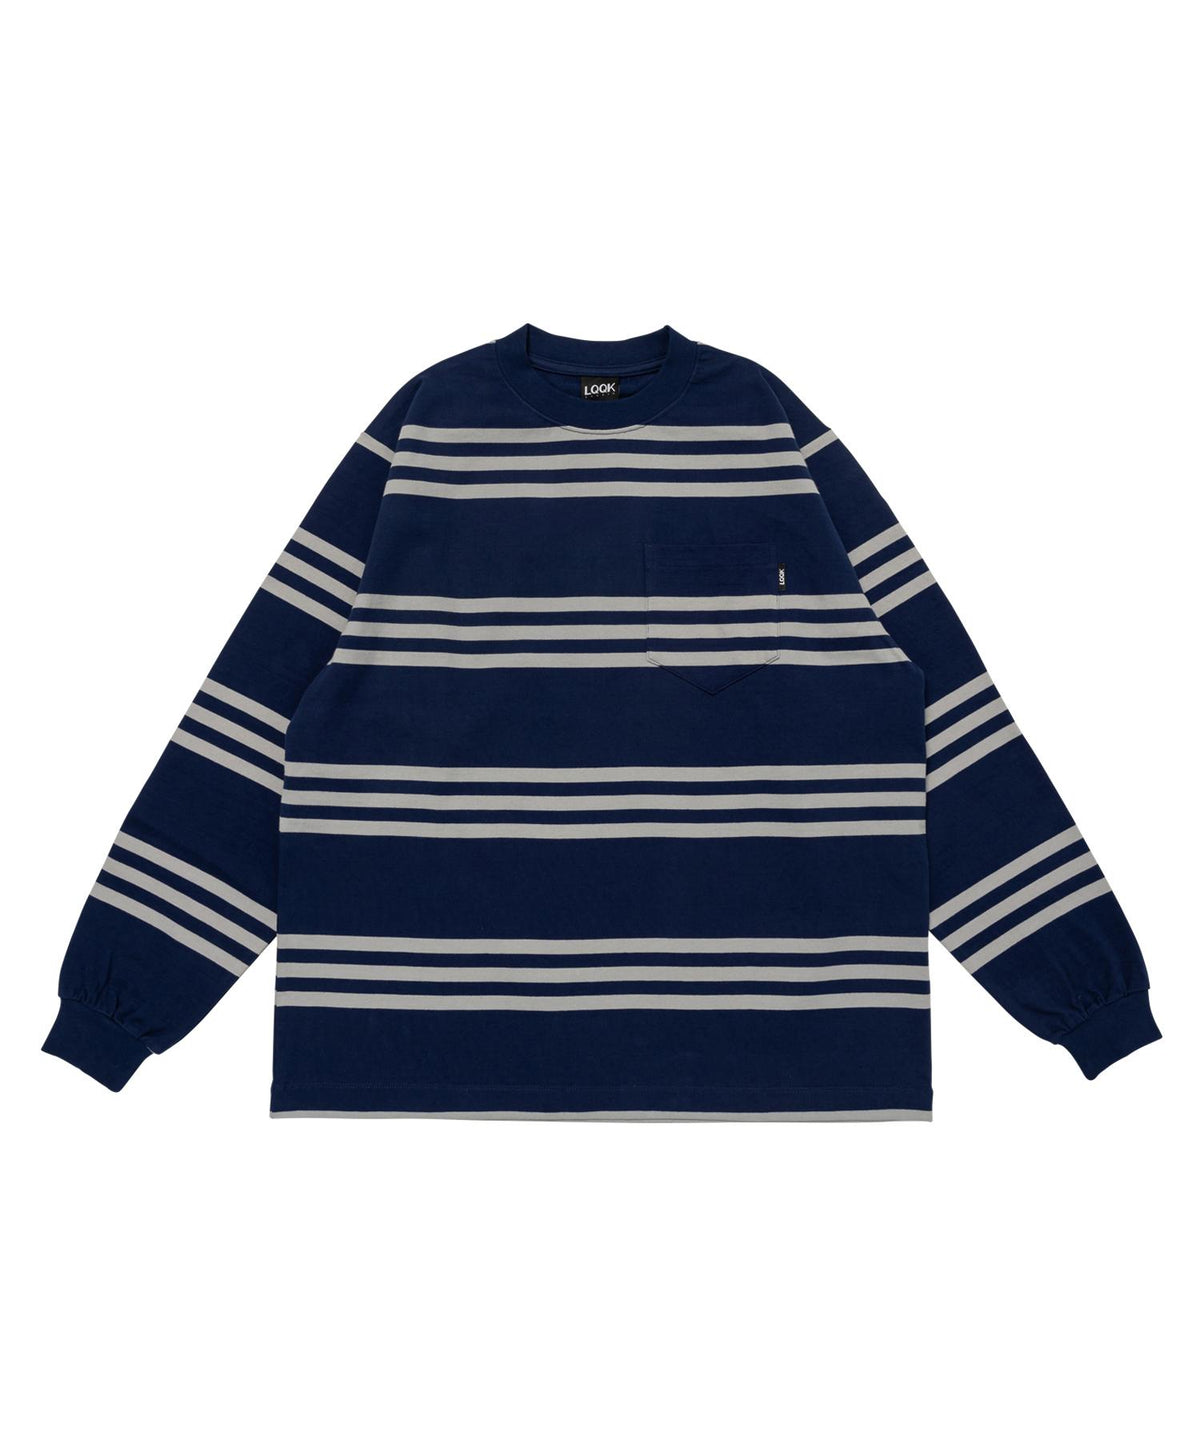 L/S RUGBY WEIGHT POCKET TEE